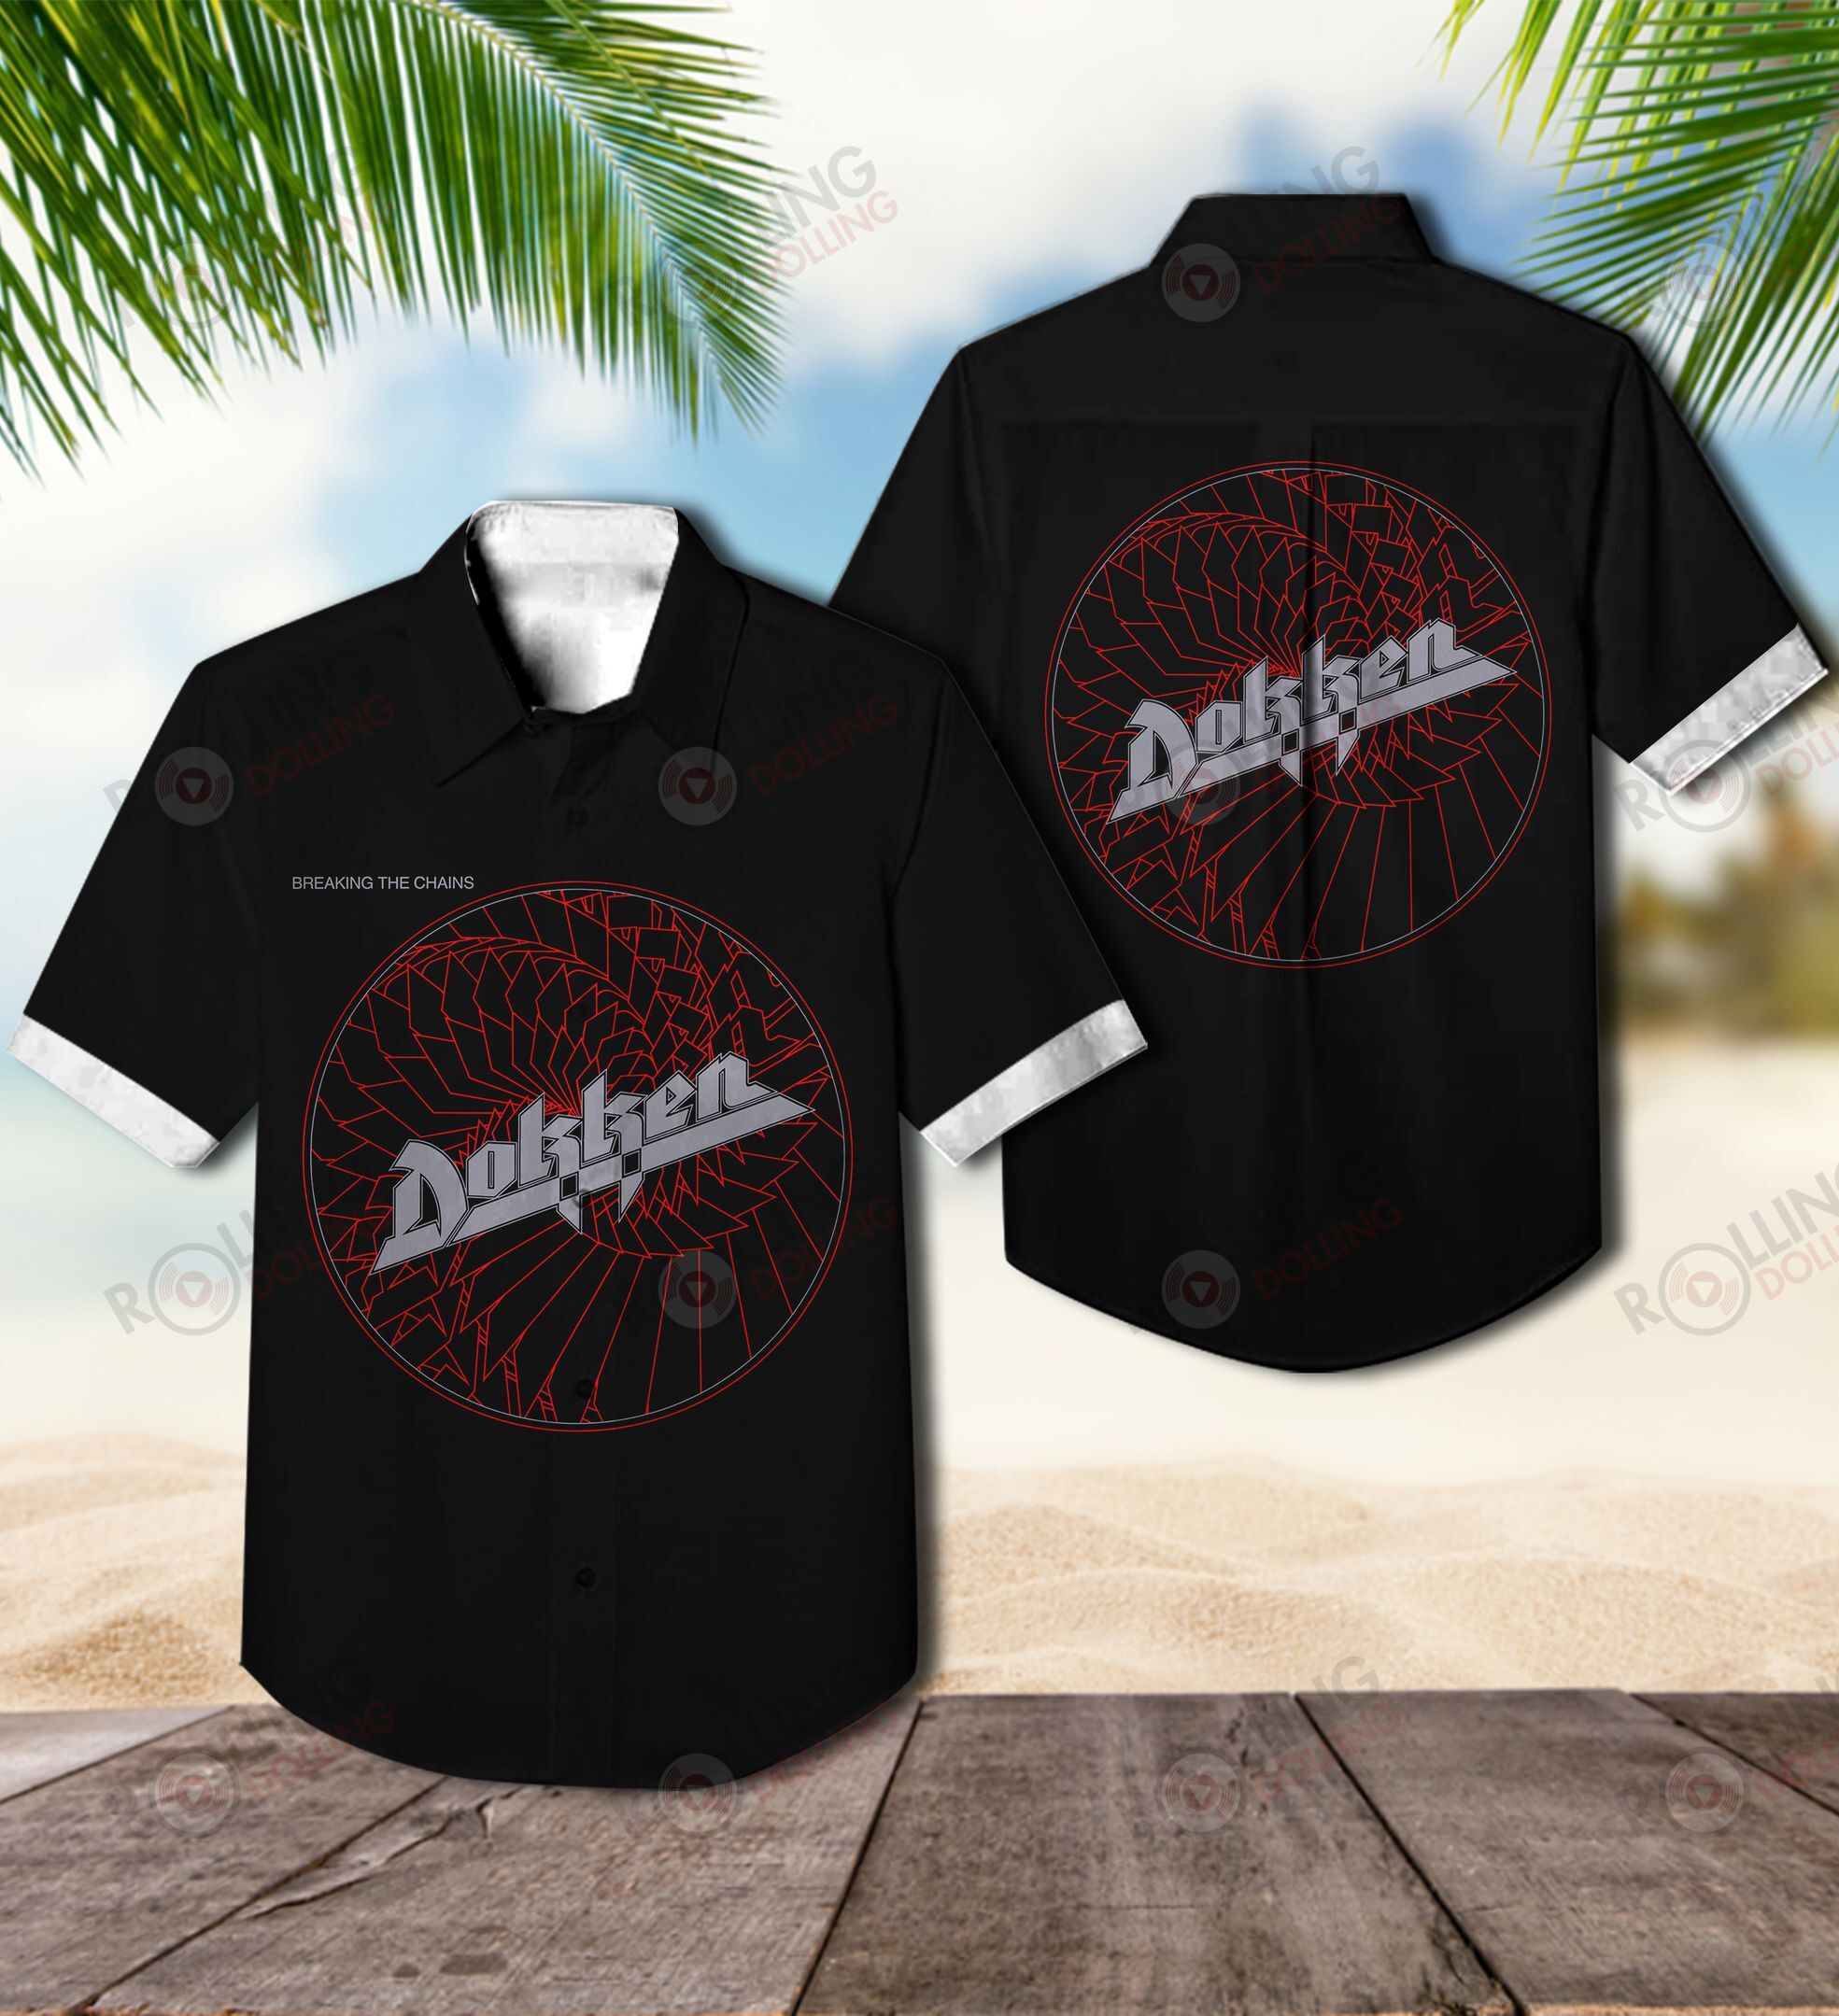 This would make a great gift for any fan who loves Hawaiian Shirt as well as Rock band 142